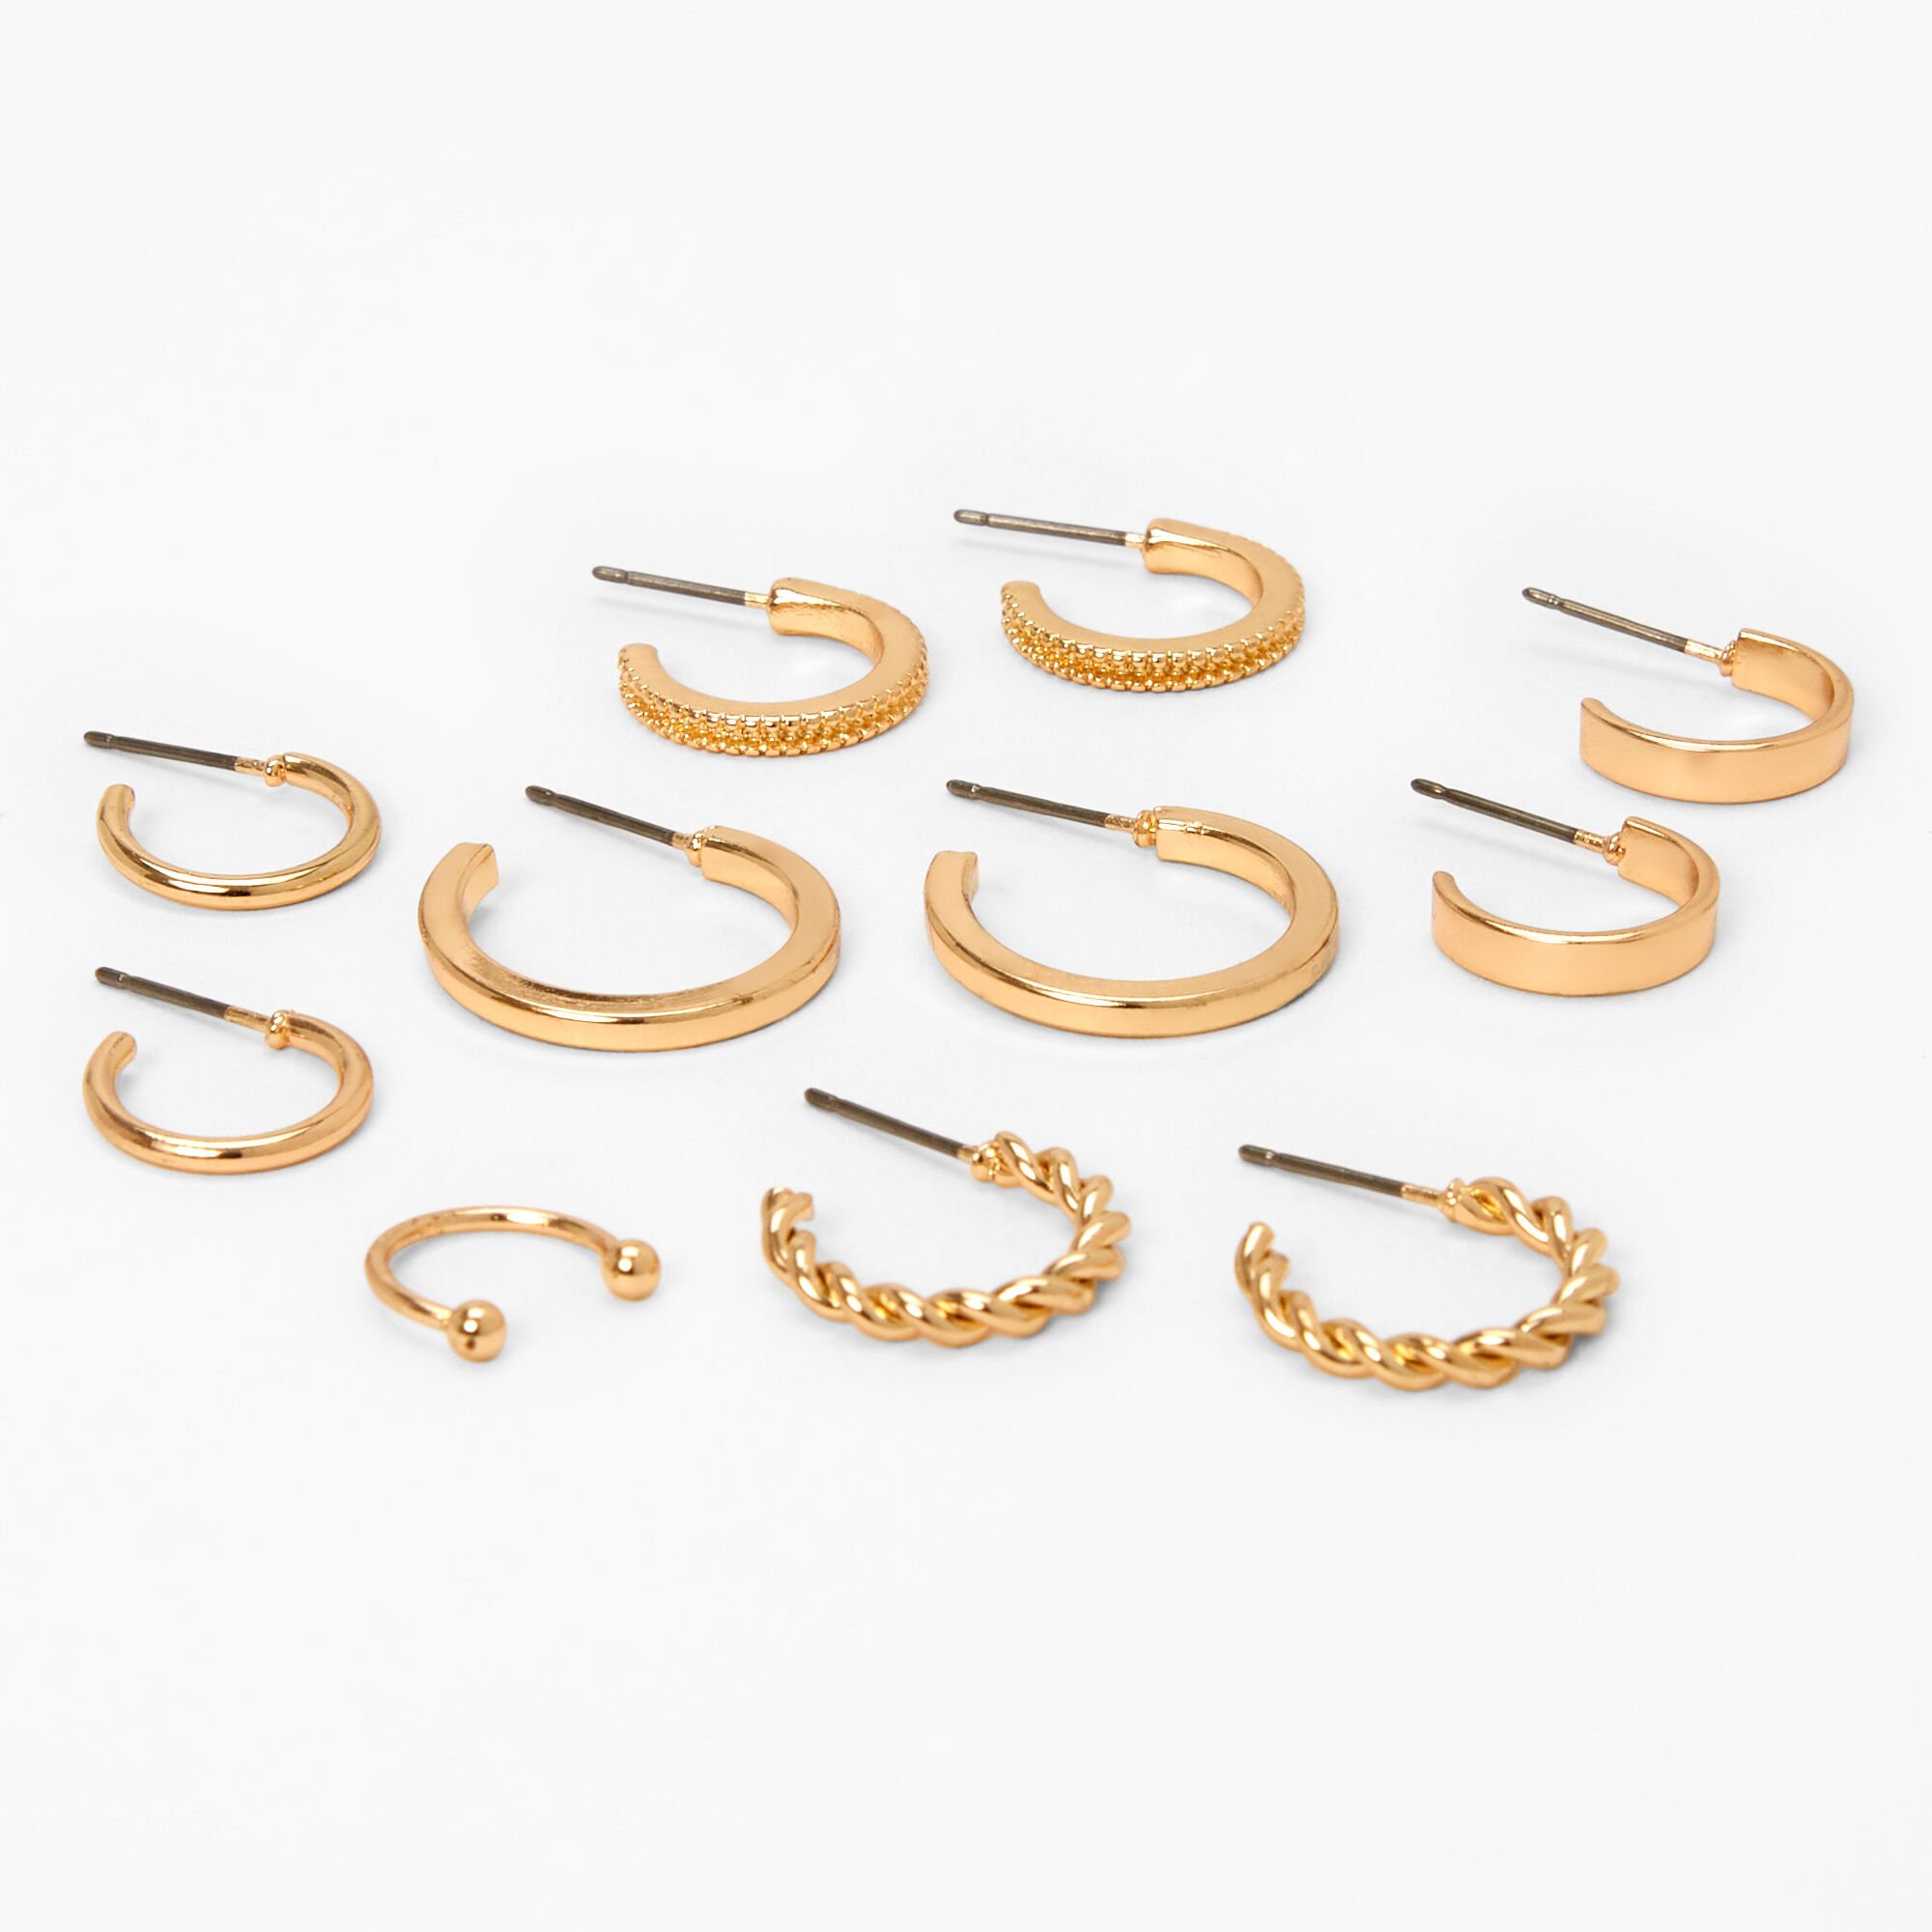 View Claires Mixed Hoop Earrings And Ear Cuff Set 6 Pack Gold information